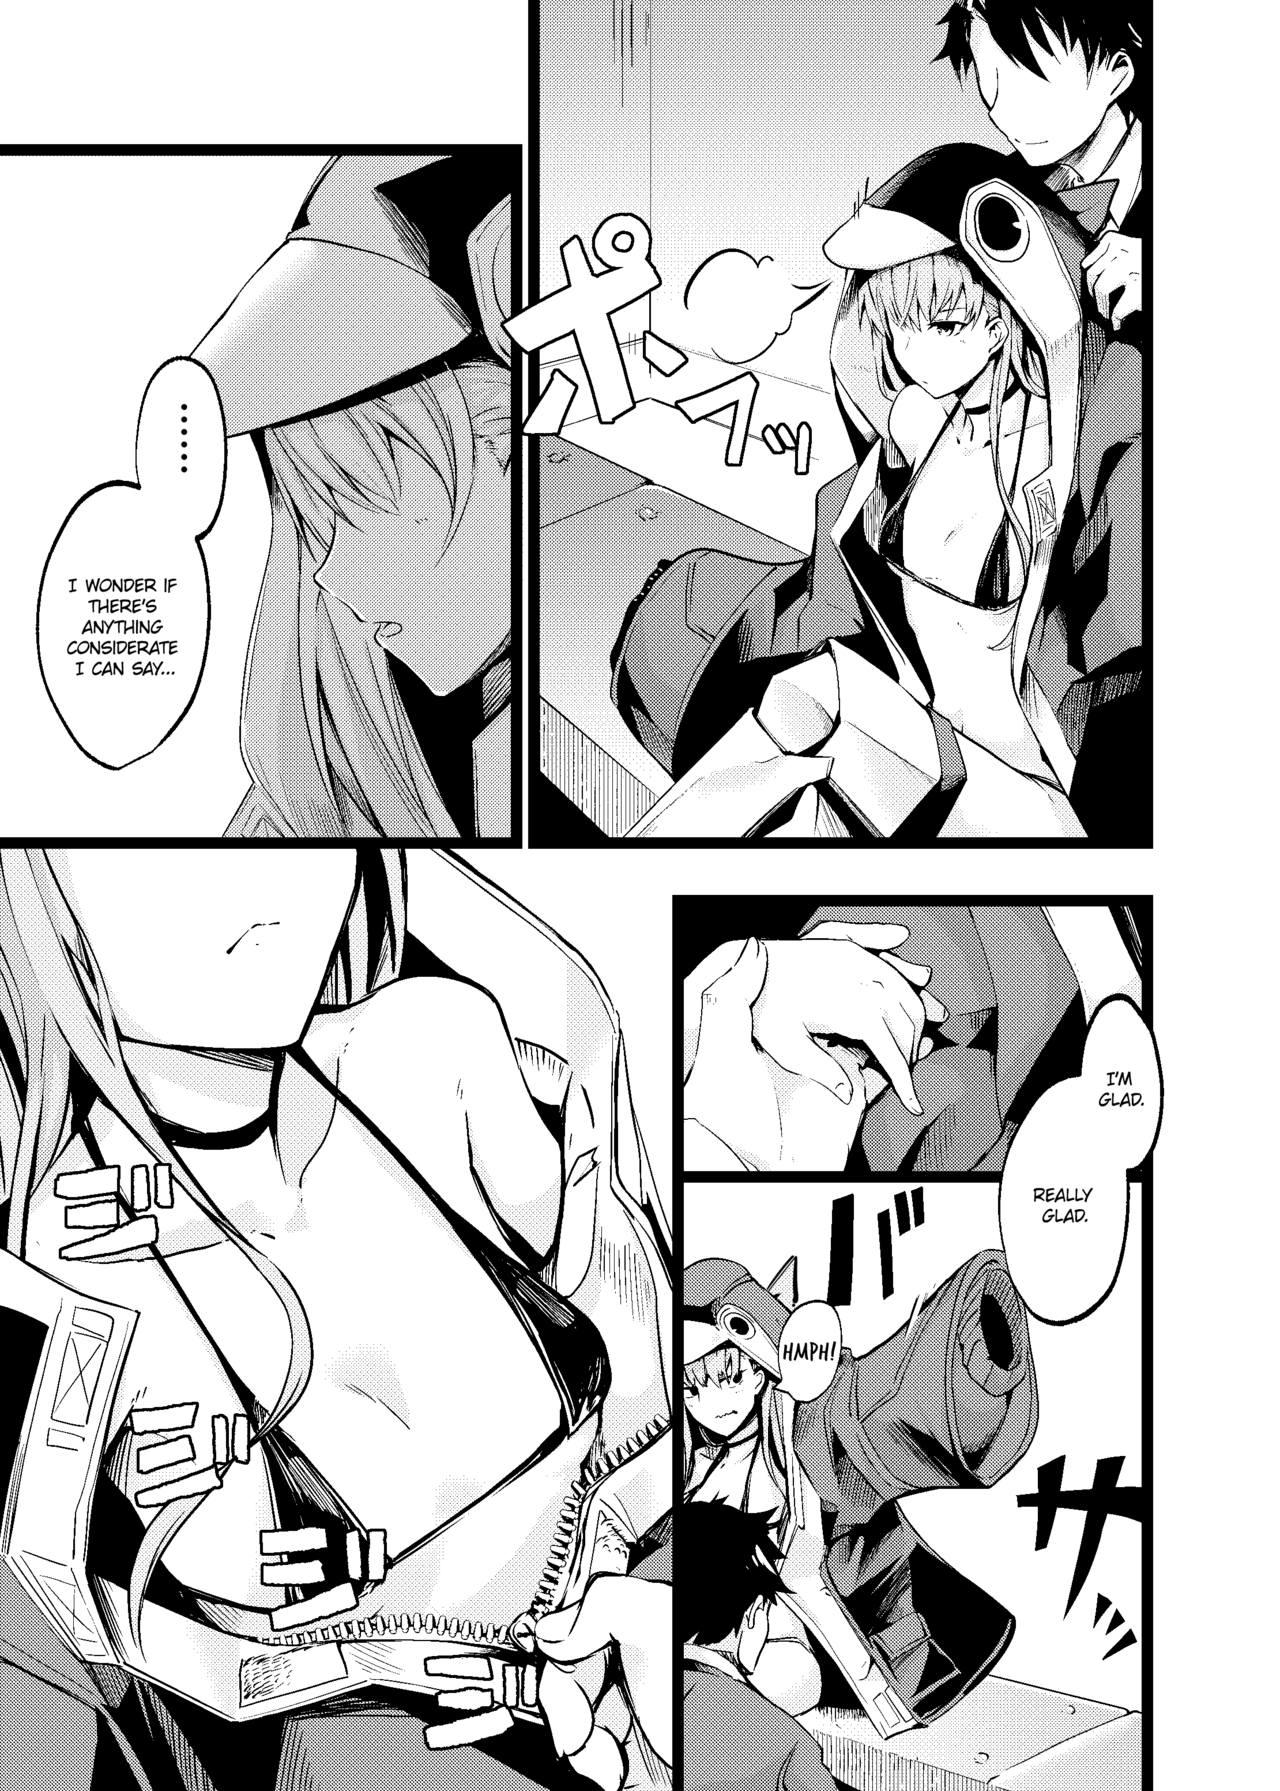 Jerk Doing it with Meltryllis in her Swimsuit - Fate grand order Full - Page 4